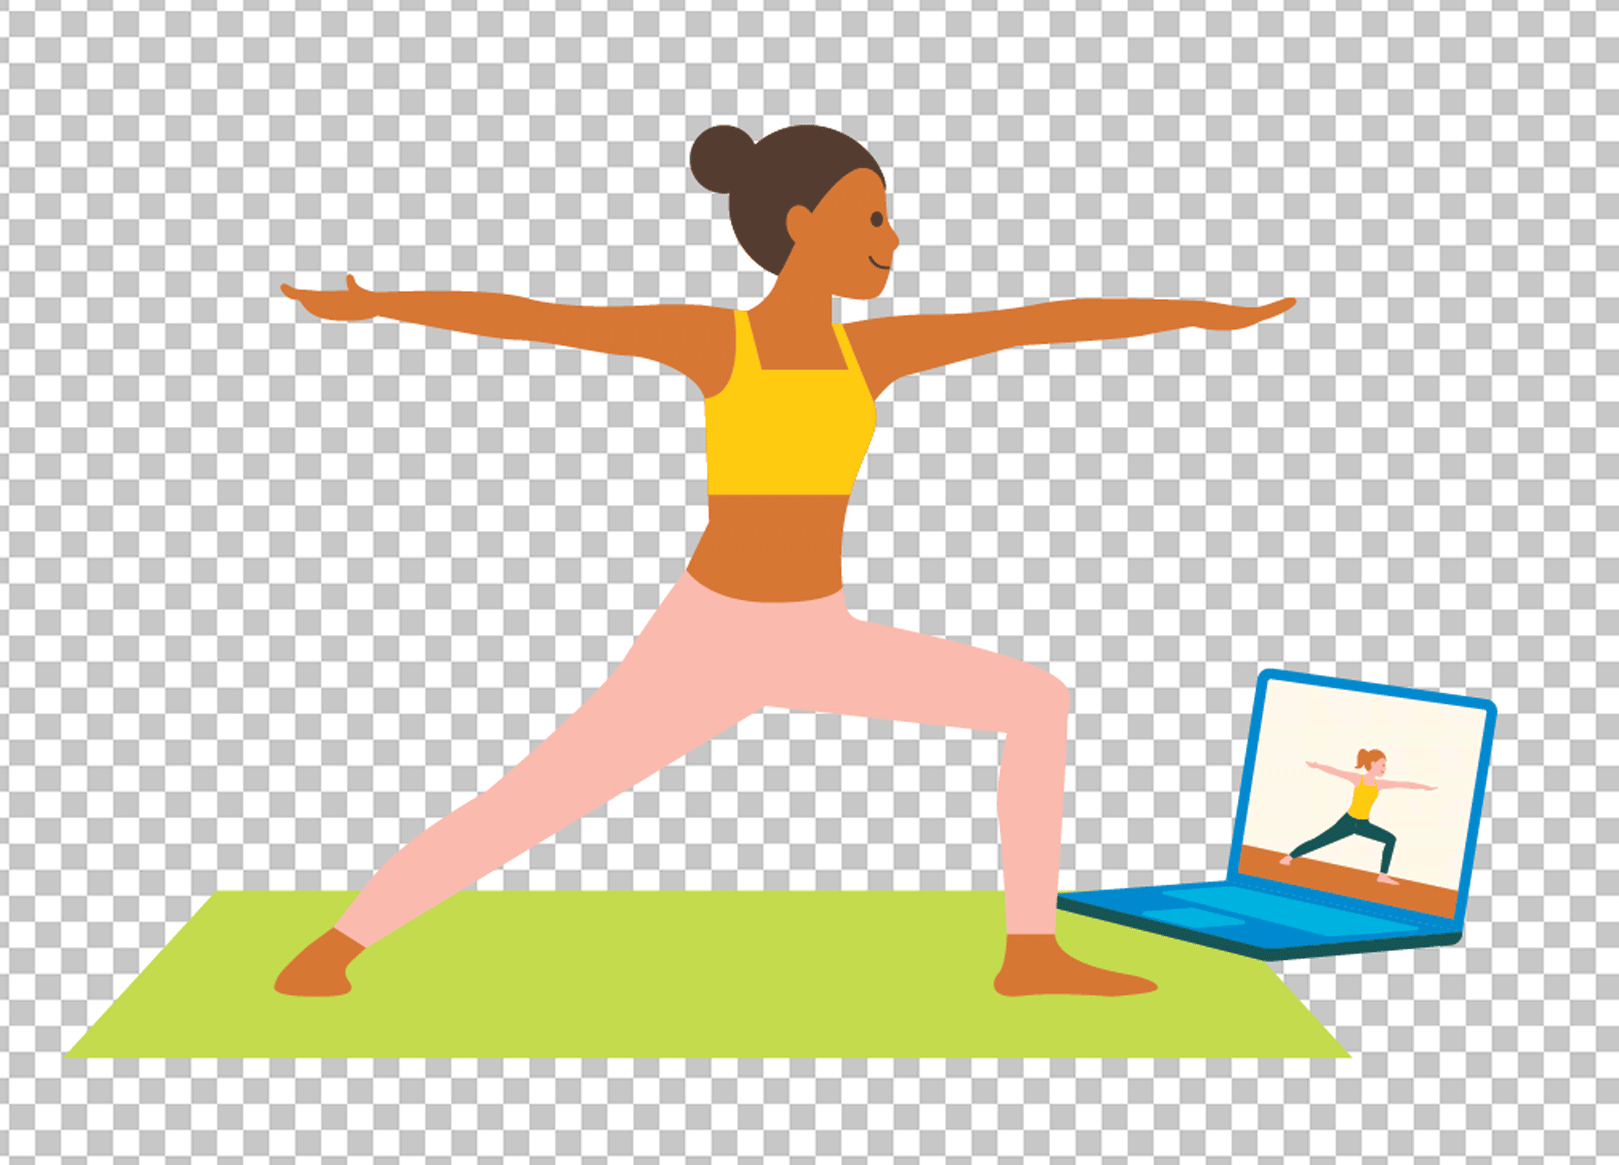 Online Yoga class PNG image